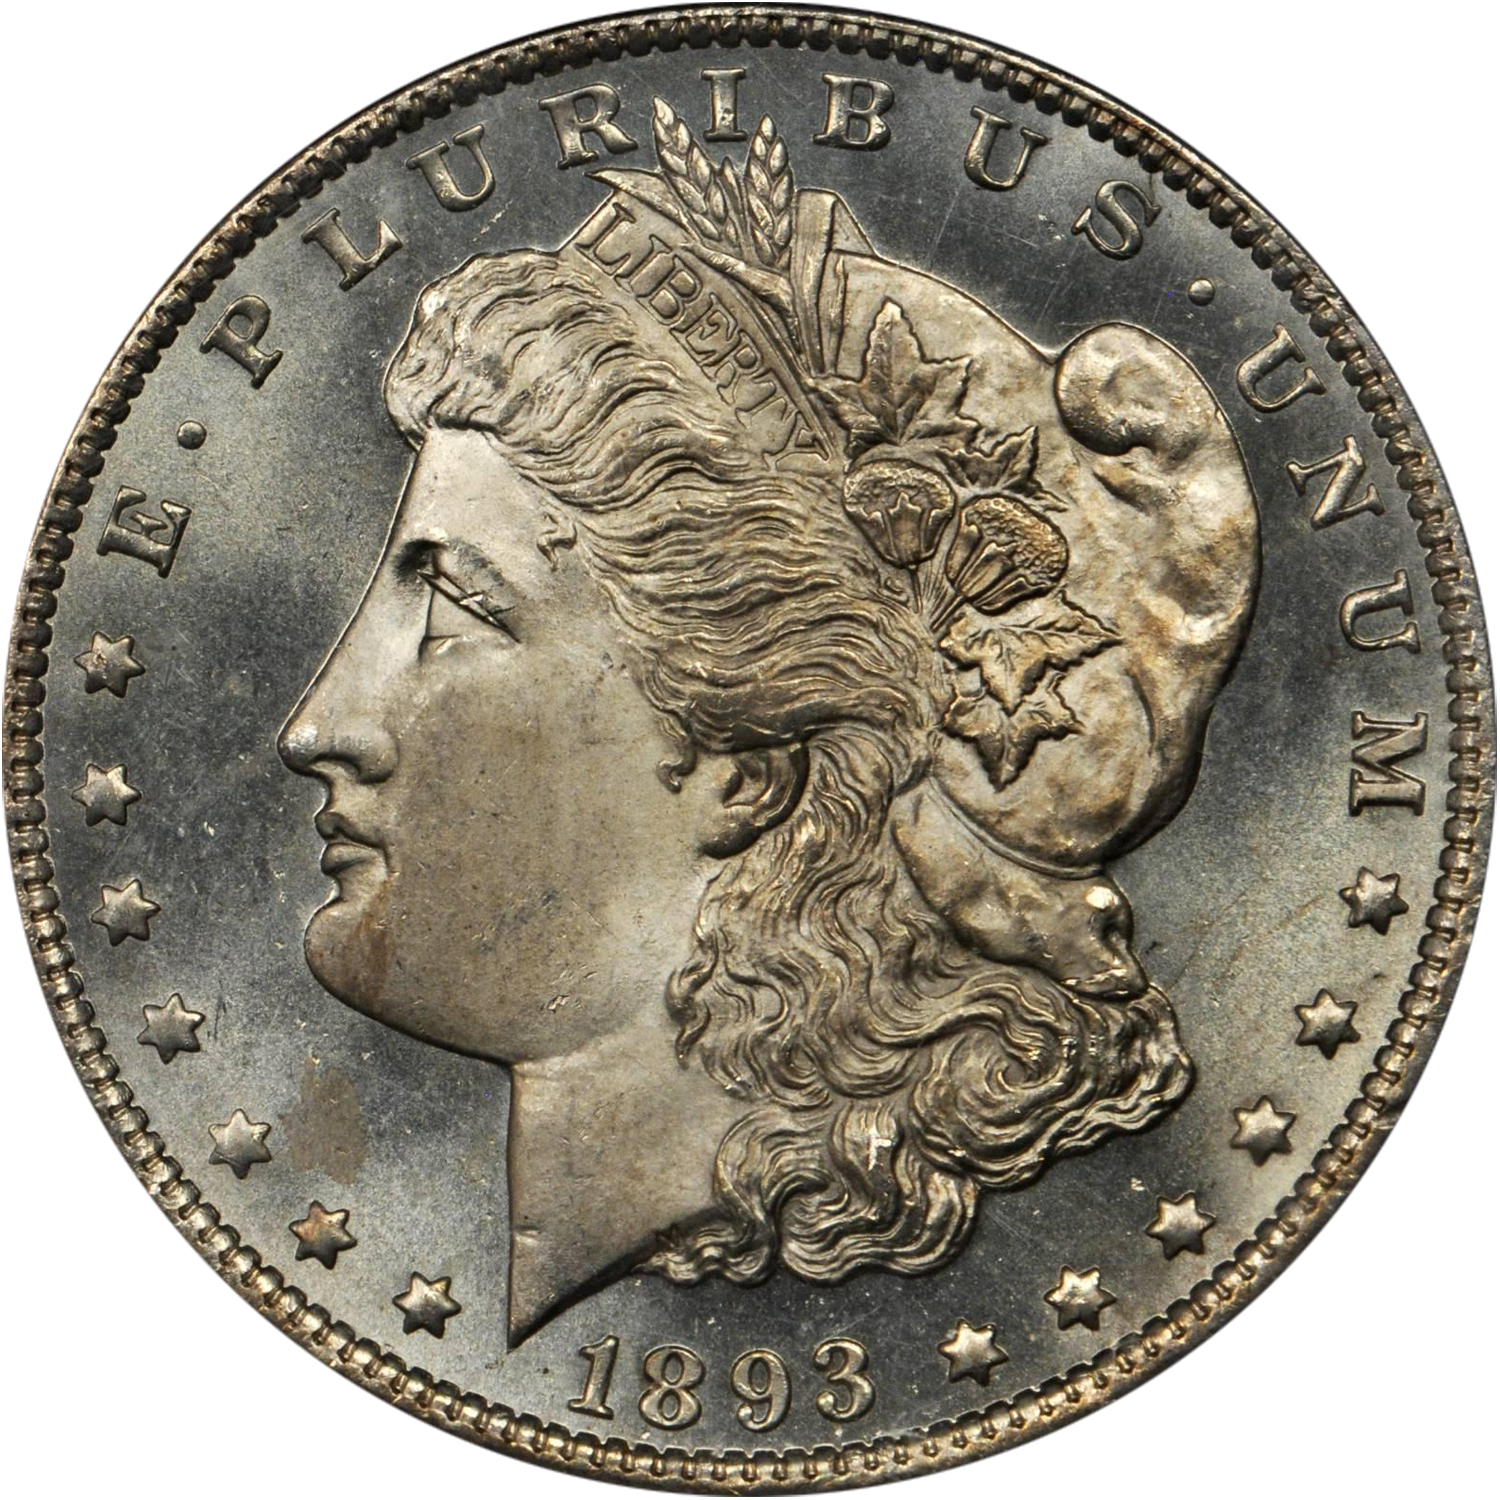 1893 new orleans mint morgan dollar price guide value